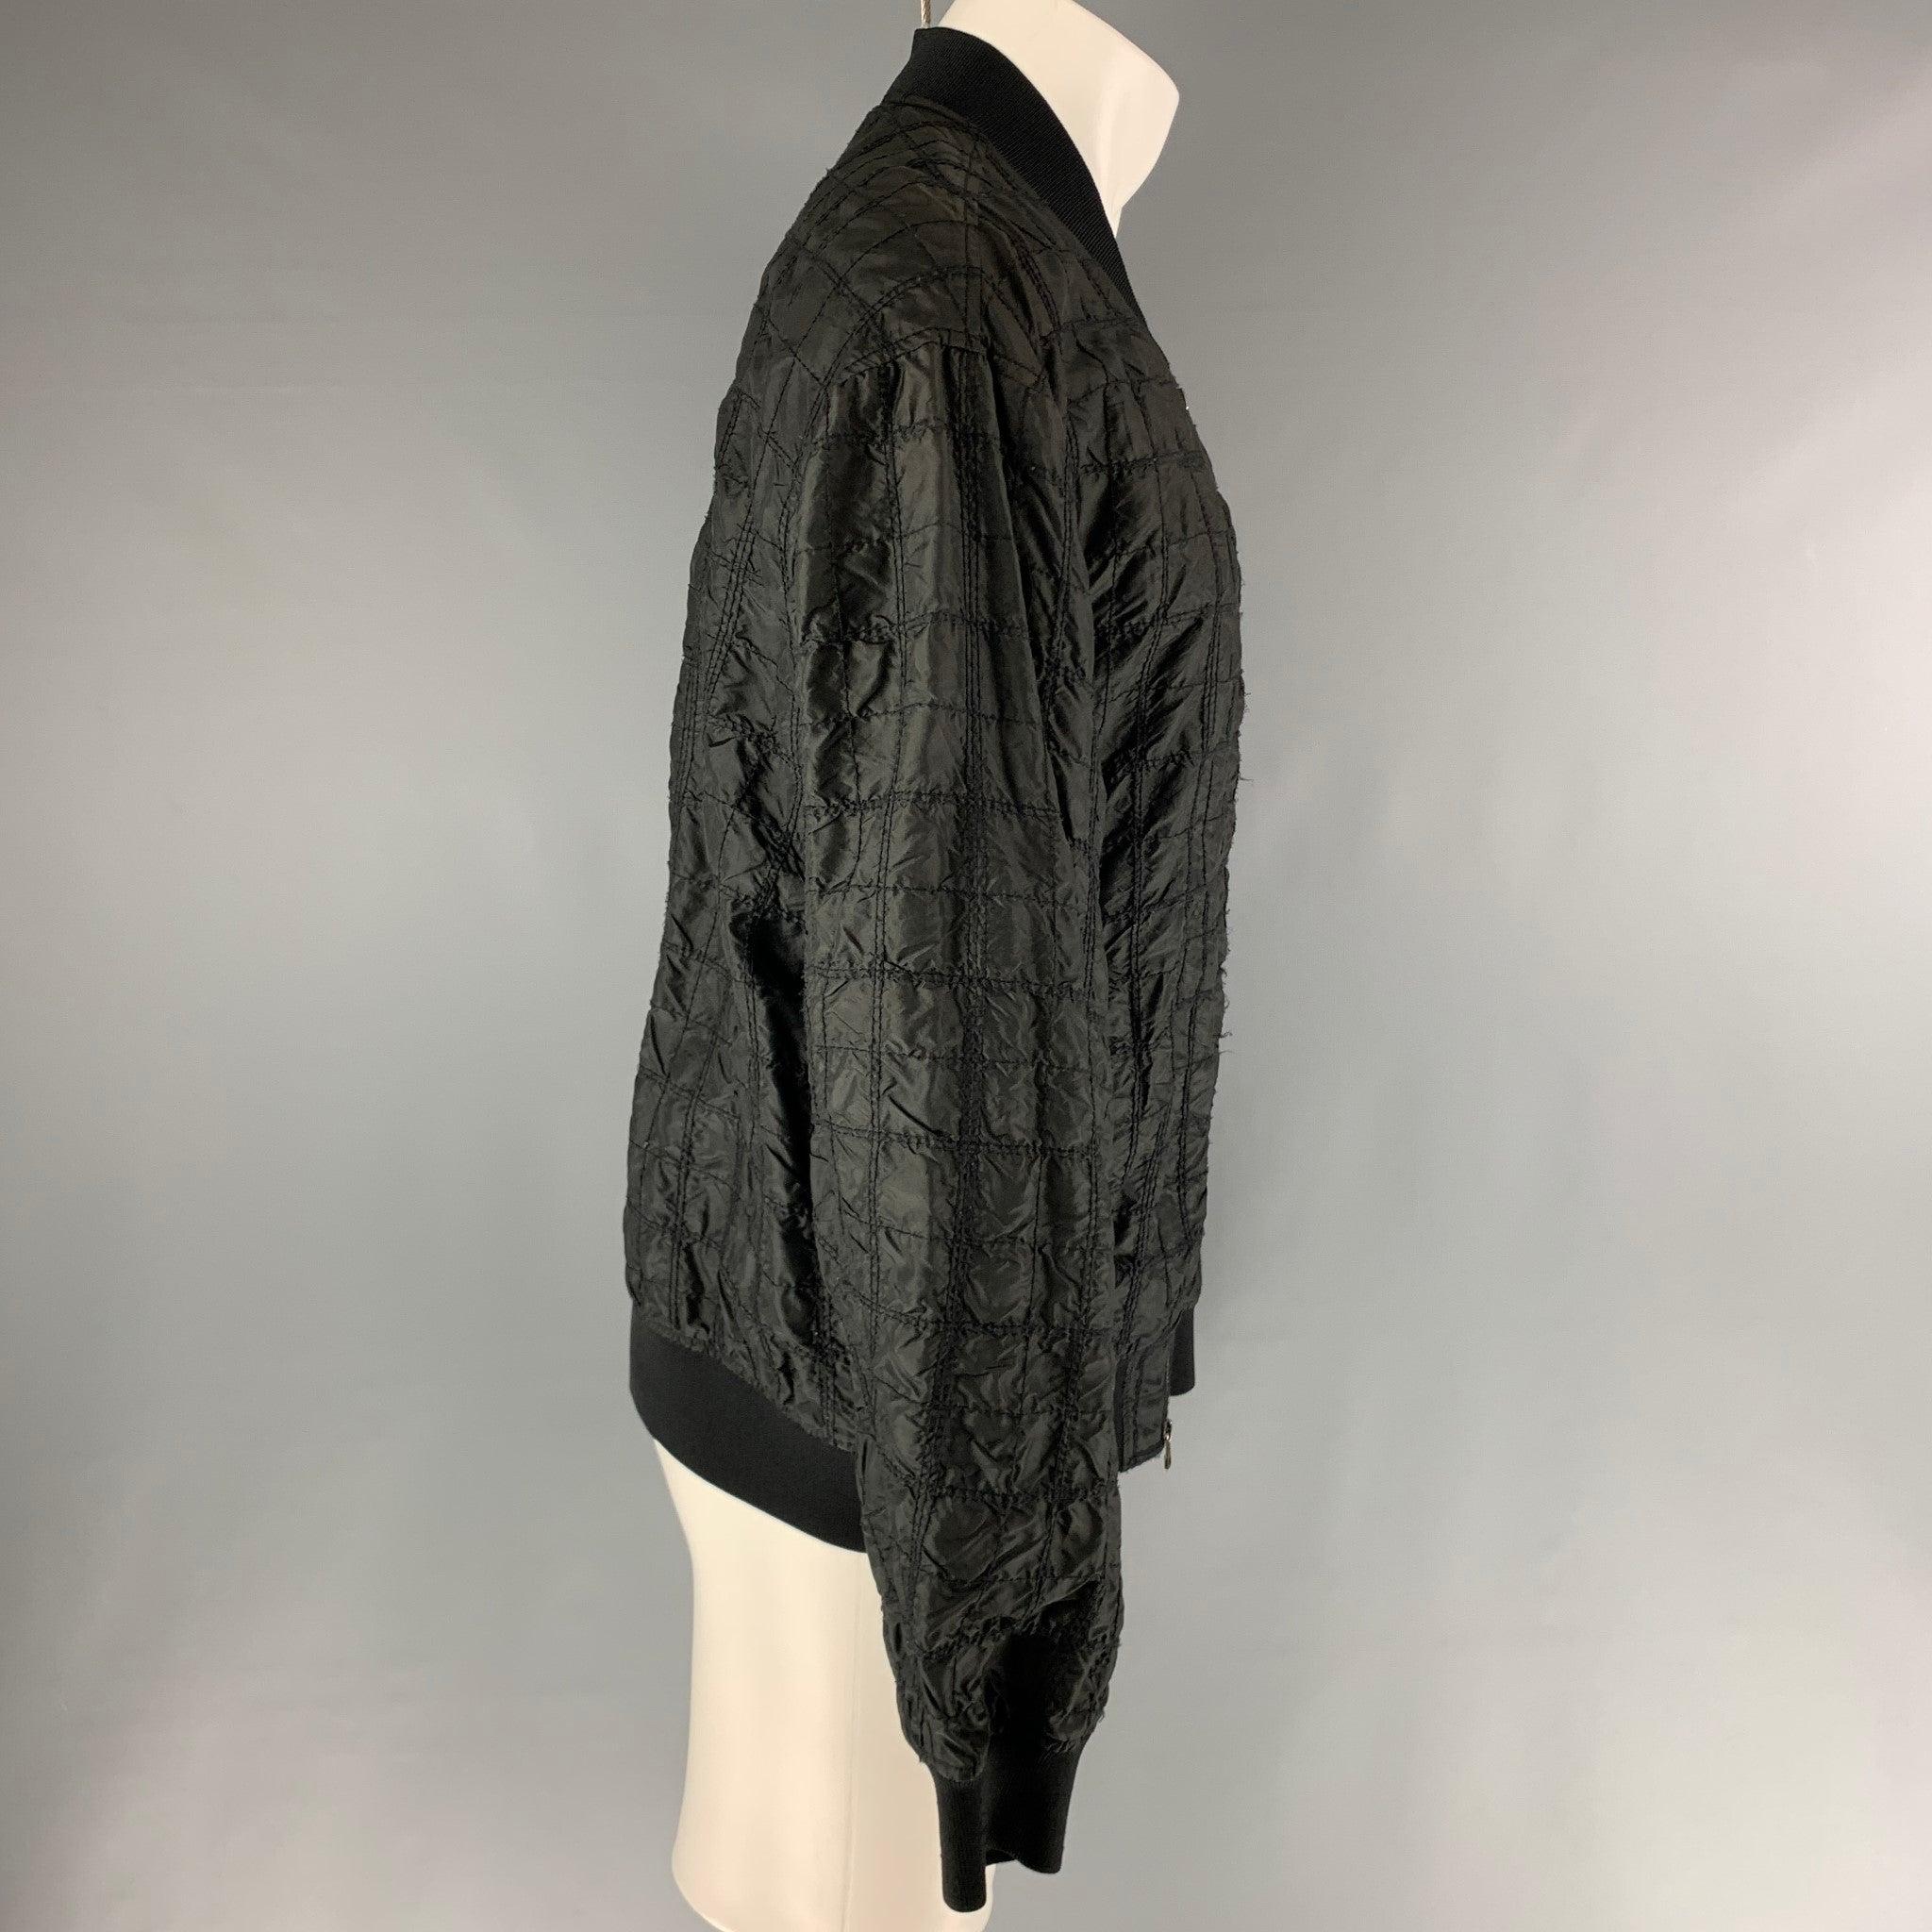 3.1 PHILIP LIM black bomber jacket comes in black silk and viscose blend, and features a quilted effect.Very Good Pre-Owned Condition. 

Marked:   M 

Measurements: 
 
Shoulder: 22 inches Chest: 46 inches Sleeve: 25 inches Length: 27 inches  
  
  
